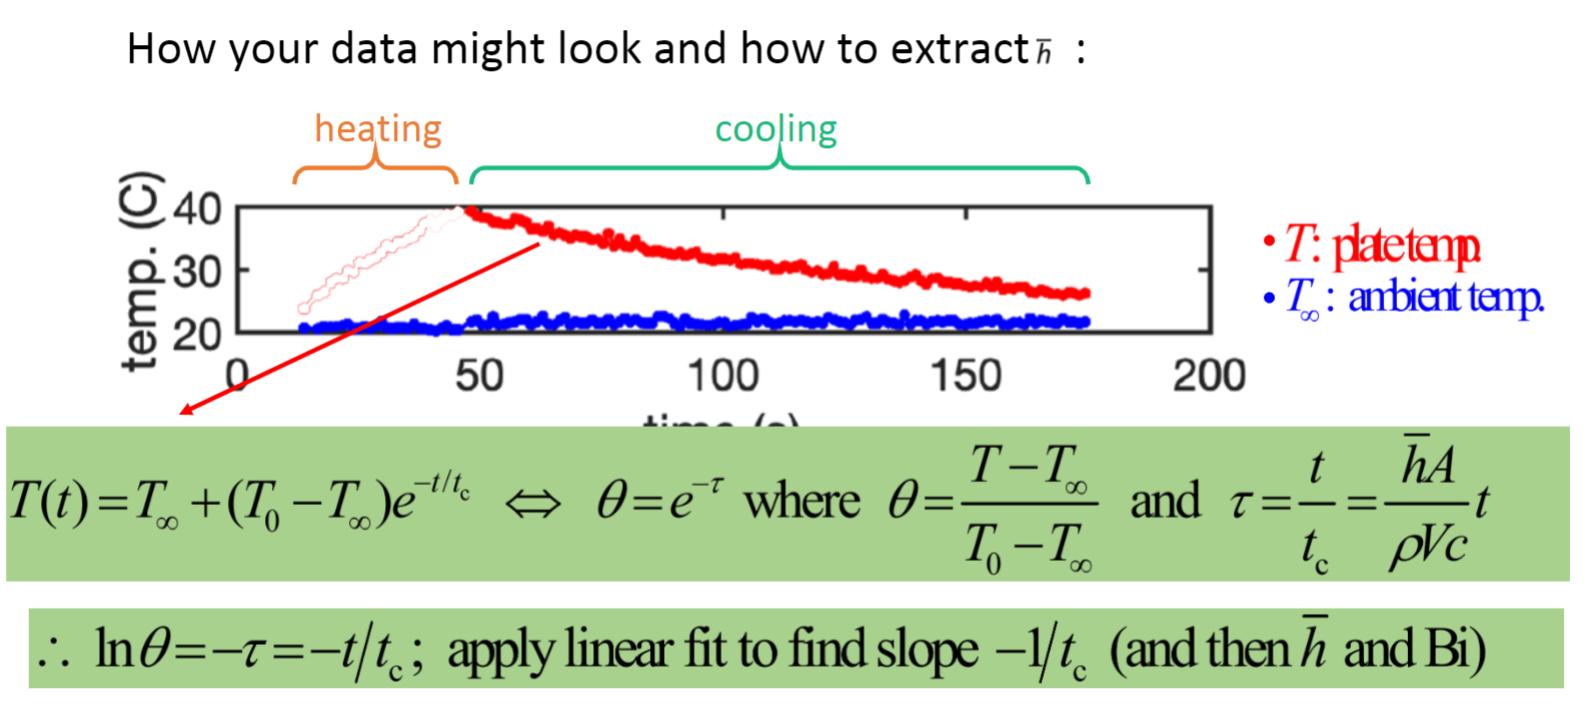 How your data might look and how to extract : heating cooling temp. (C) 40 .30 20 50 100 time (1 150 T(t)=T